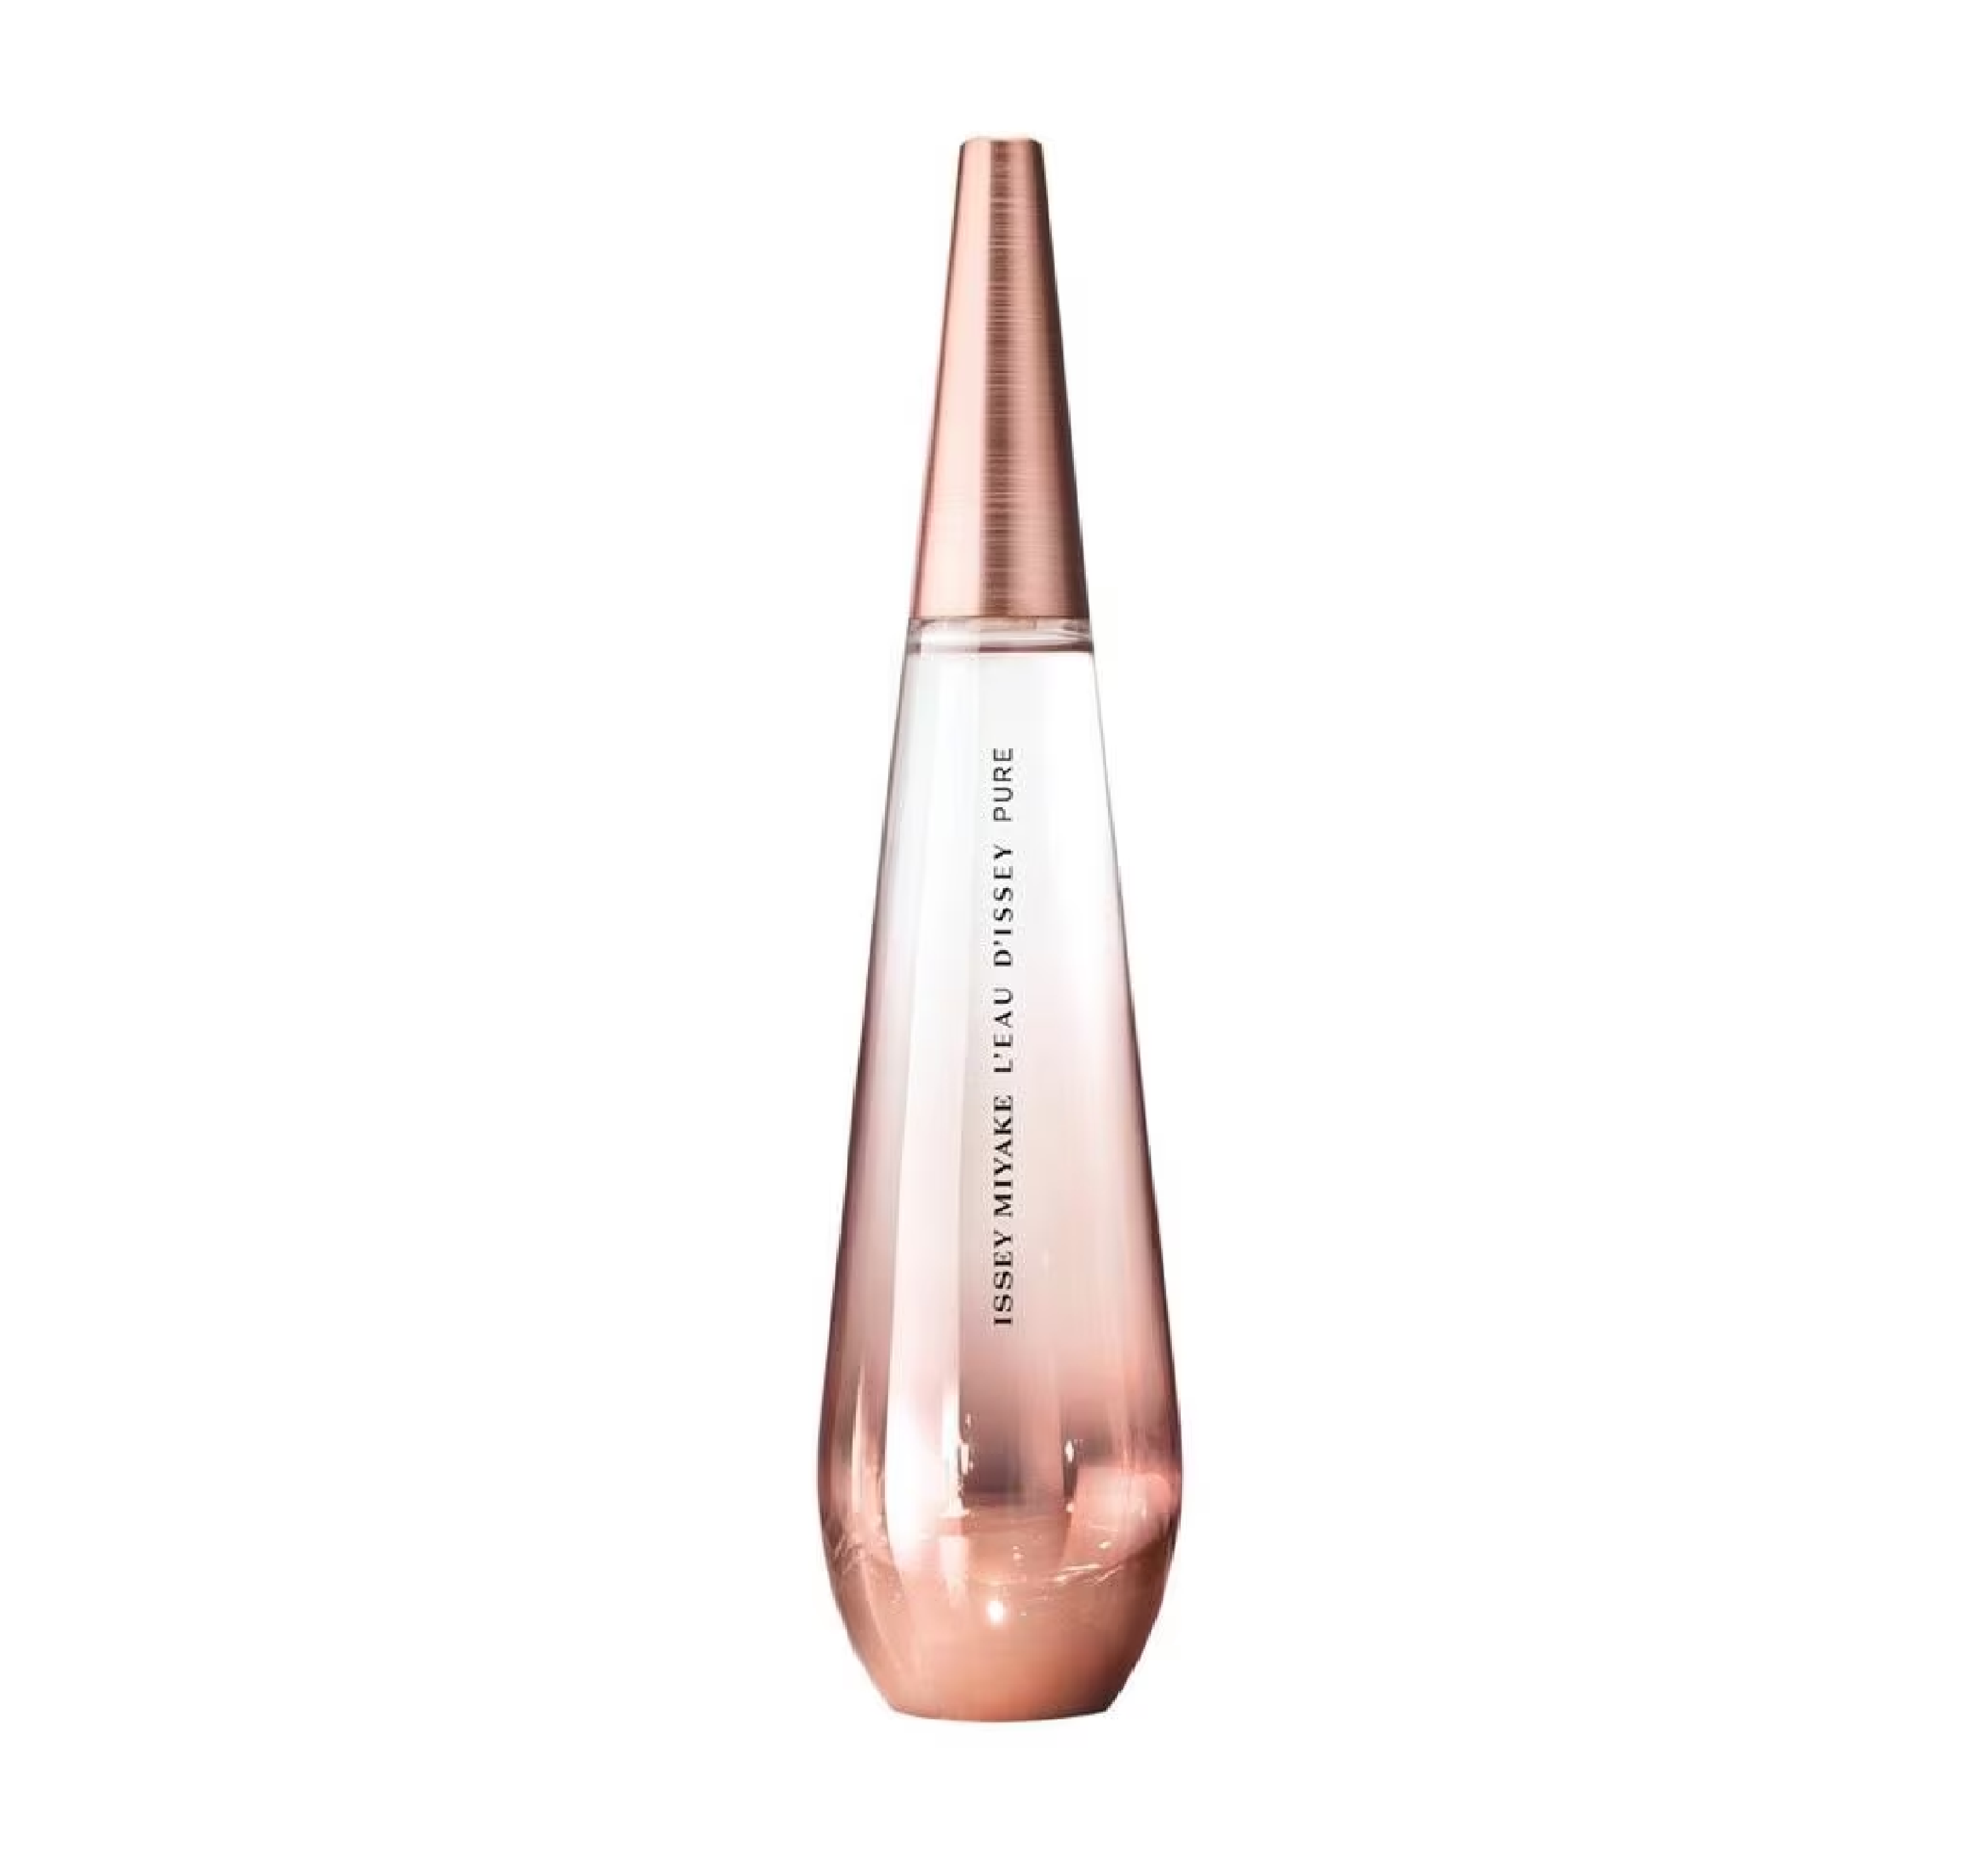 Celes (セレス) | Issey Miyake – L'Eau d'Issey Pure Nectar de